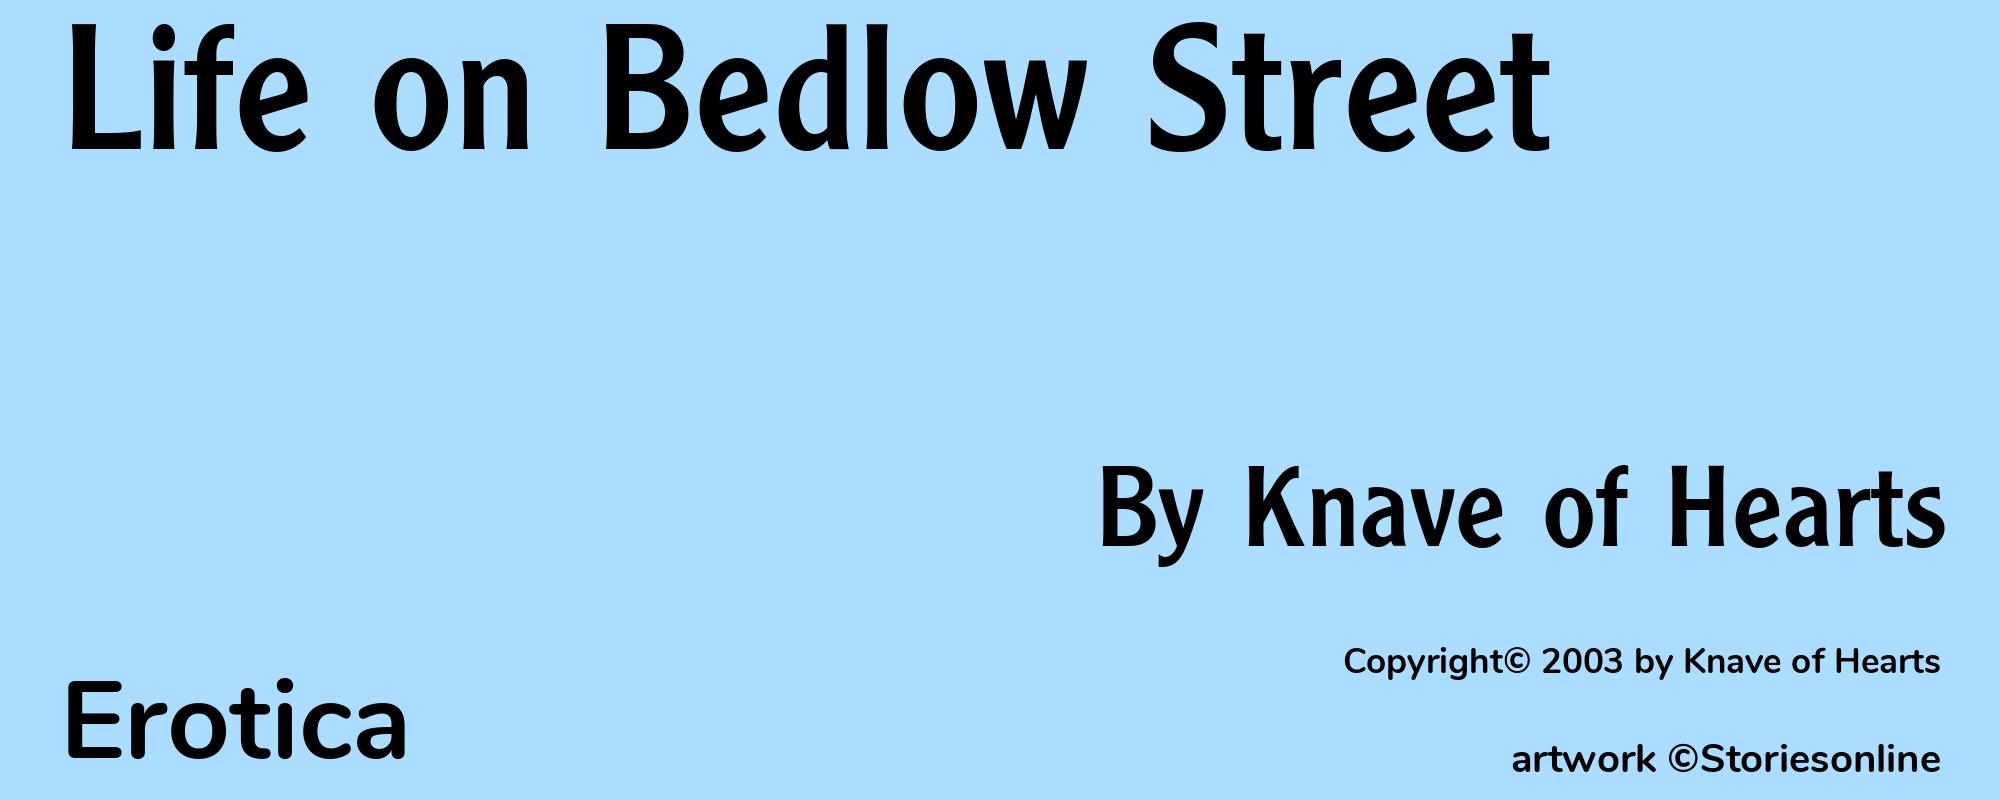 Life on Bedlow Street - Cover